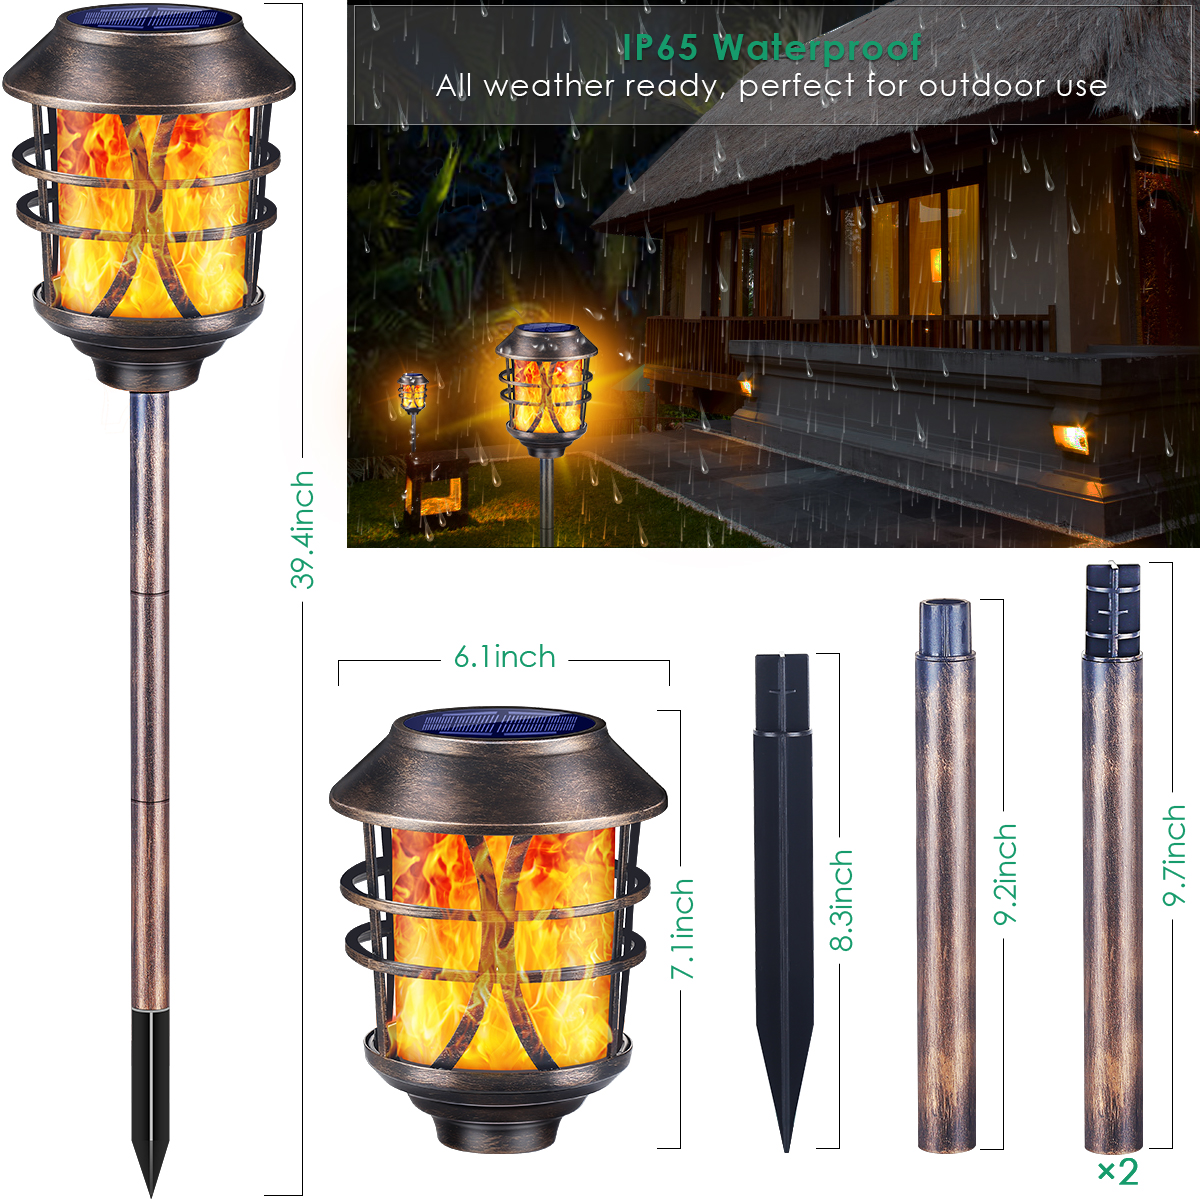 TomCare Solar Lights Metal Solar Torch Lights Flickering Flame Outdoor Lighting Decorative Landscape Pathway Garden Lights Waterproof Solar Powered Dusk to Dawn Auto On/Off for Patio Yard Pool 4 Pack